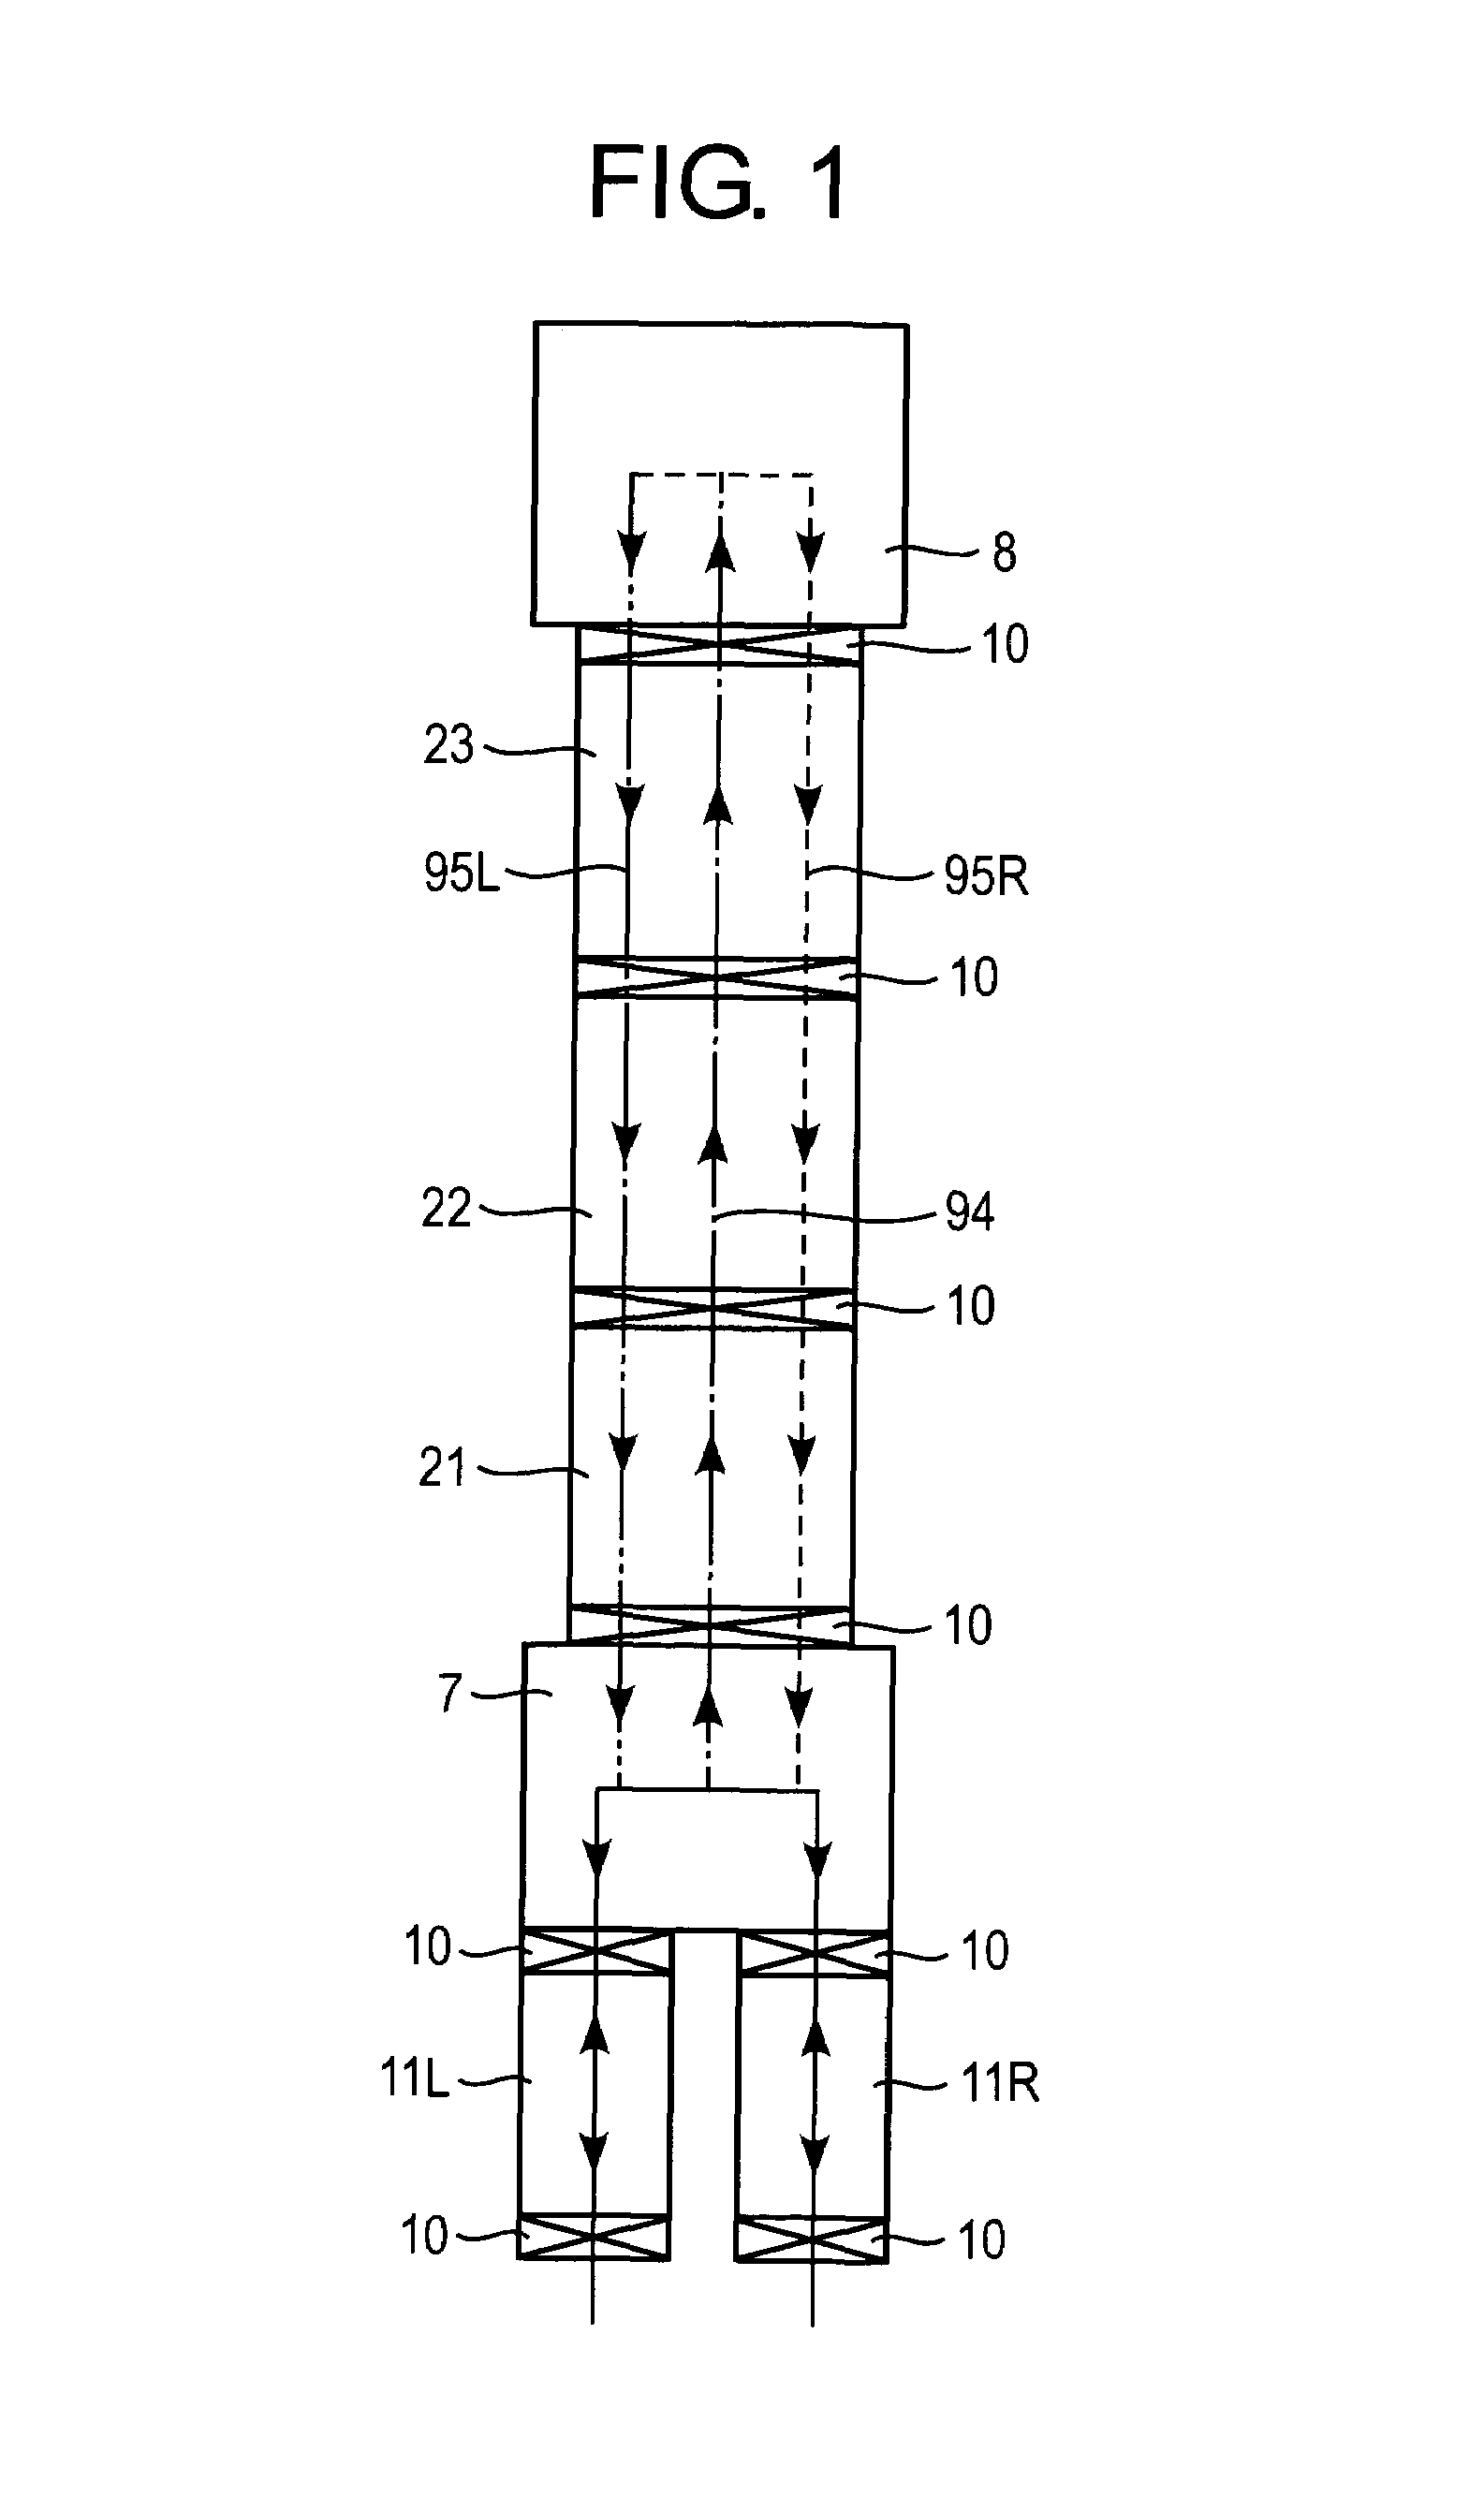 Interback-type substrate processing device